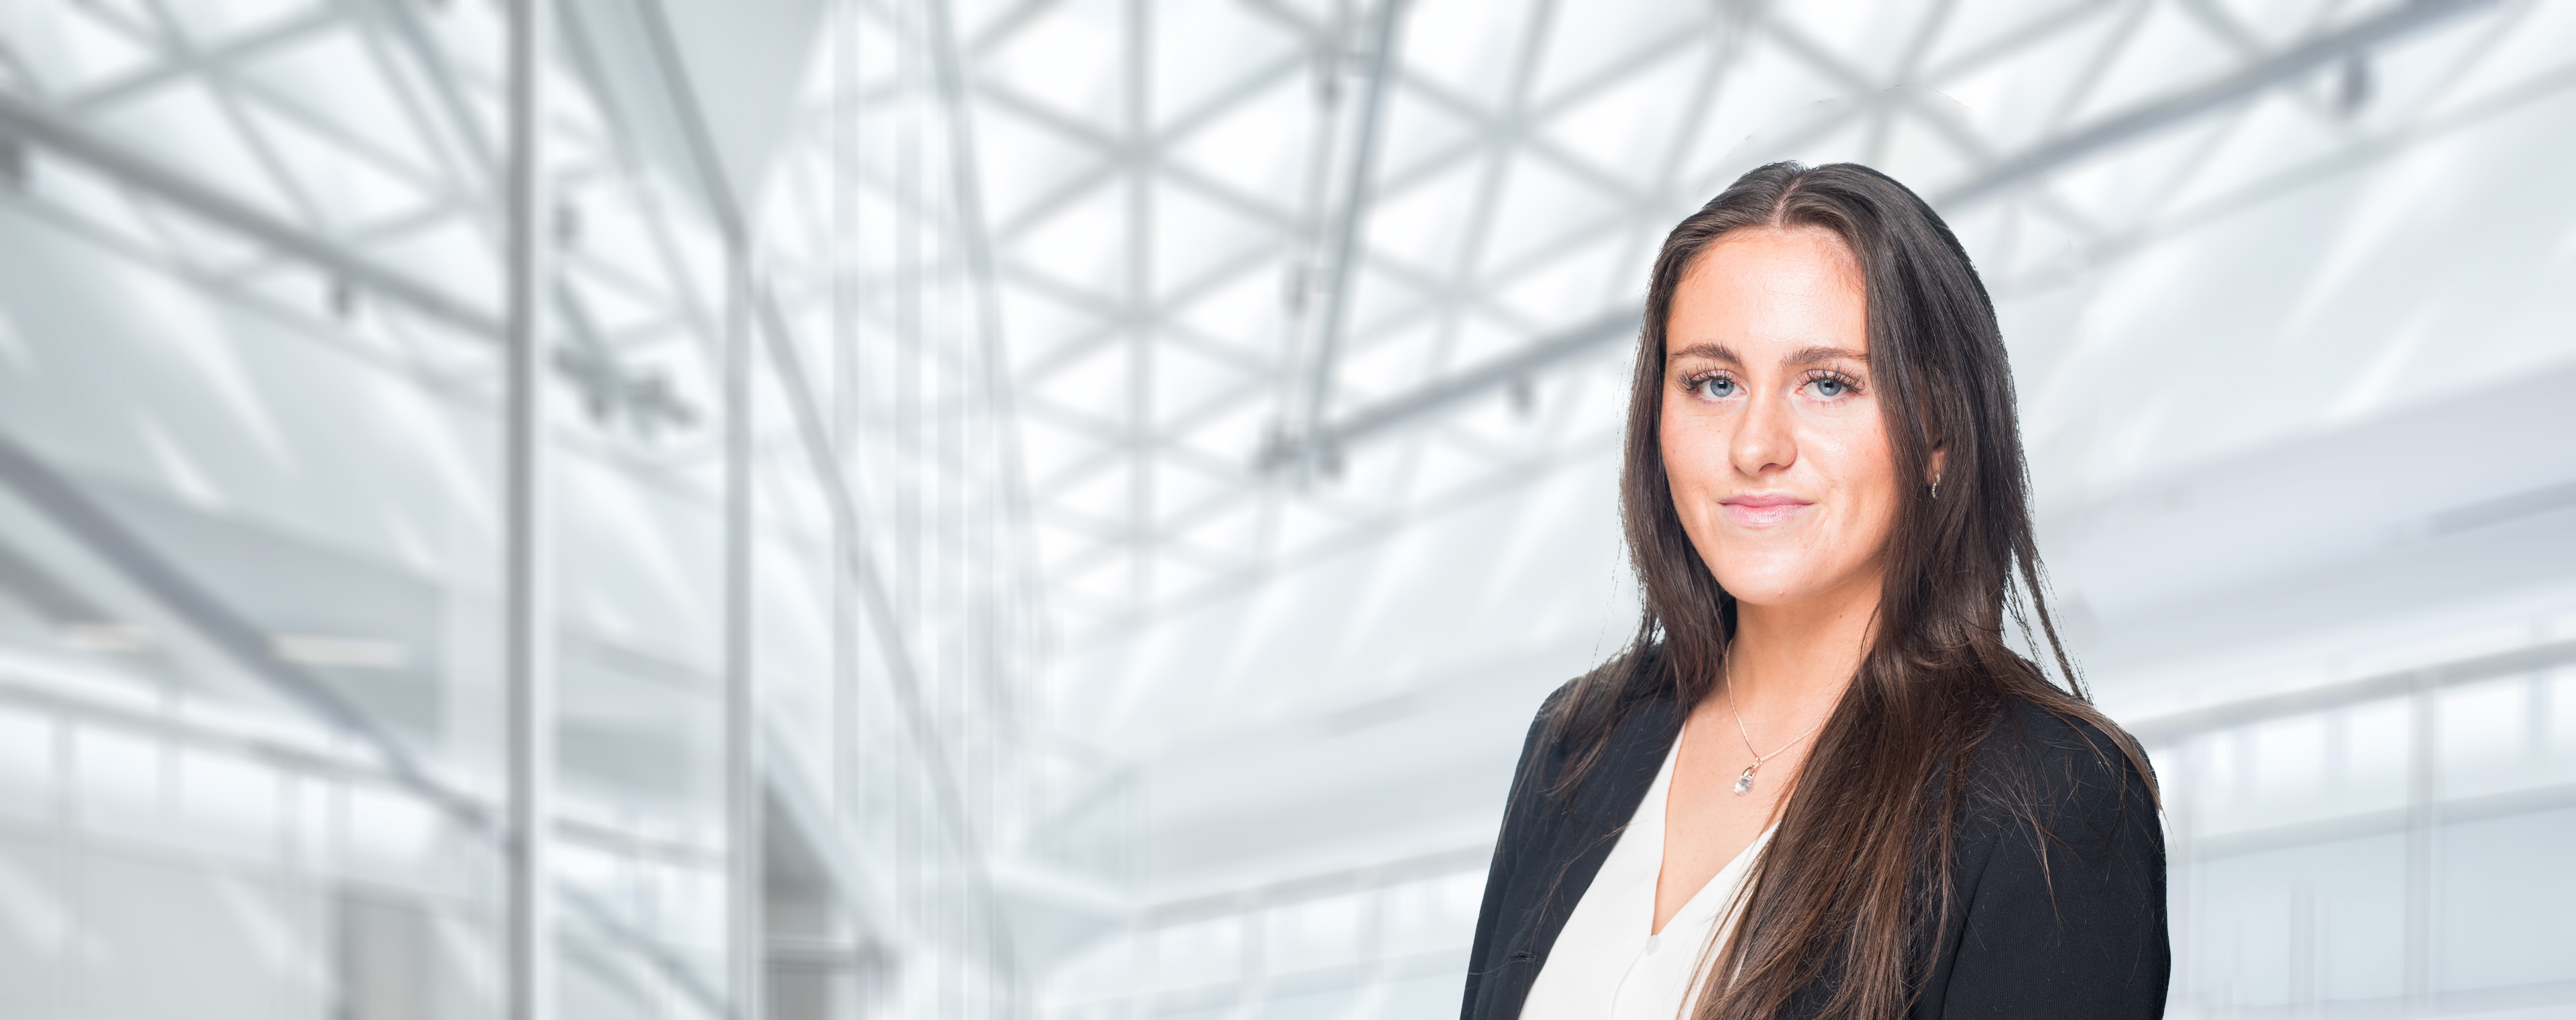 Beth Simpson | Trainee Solicitor at Thorntons